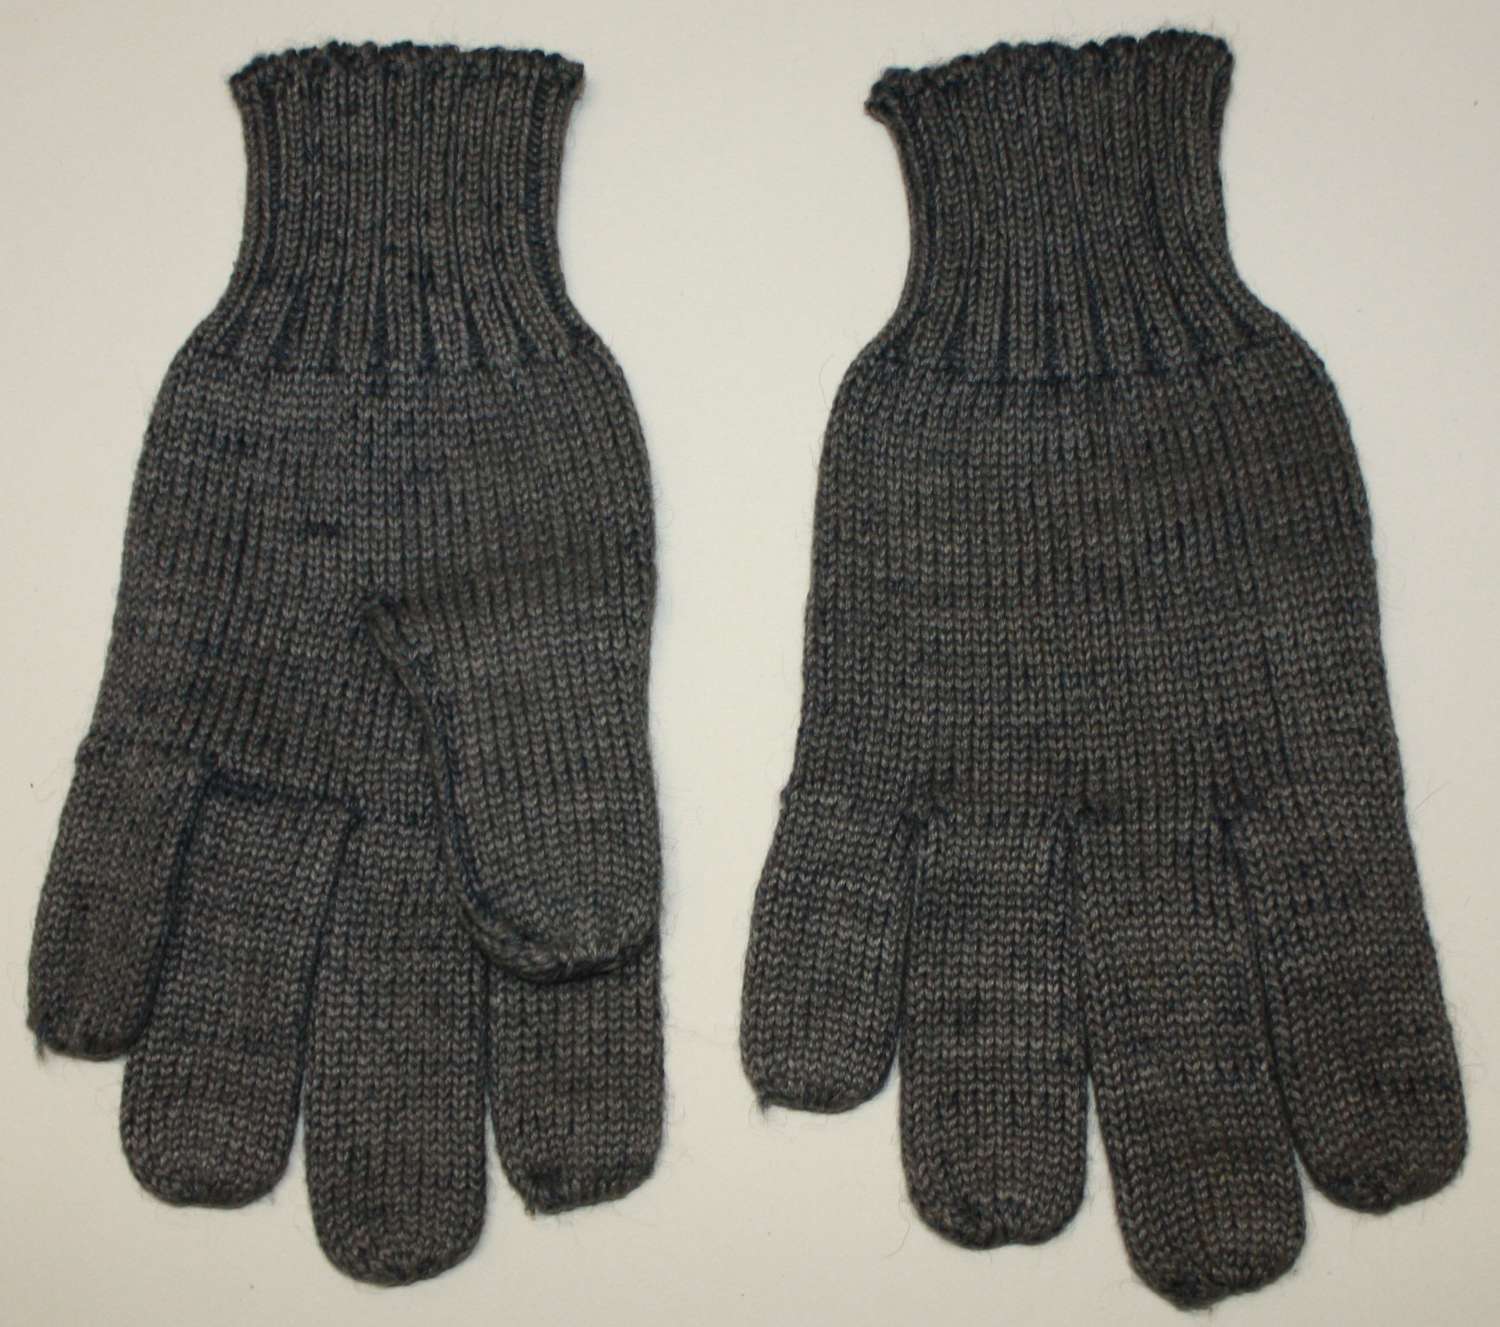 A GOOD USED PAIR OF THE WWII RAF WOOL GLOVES